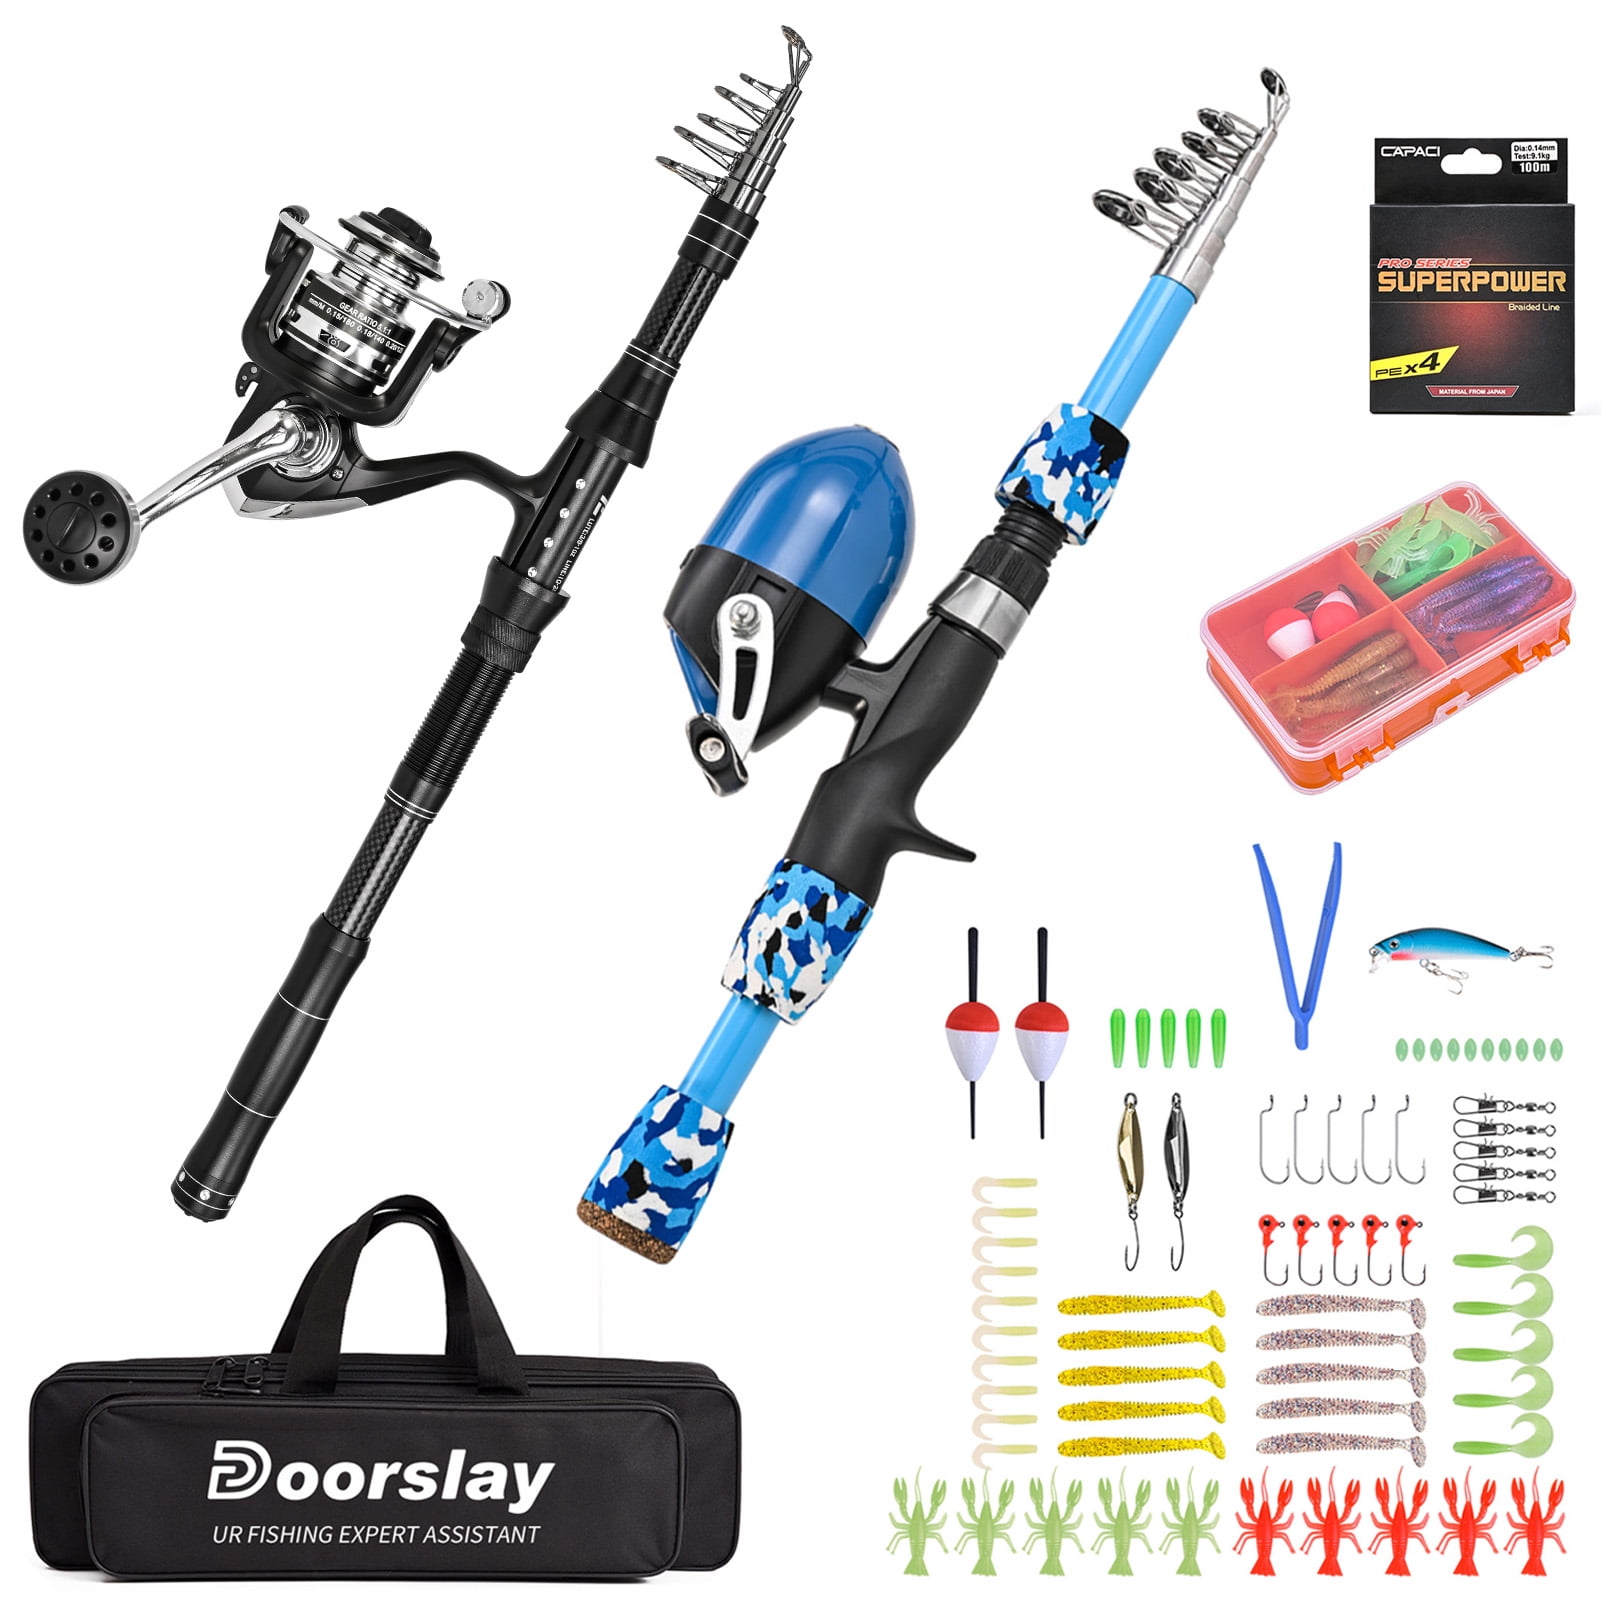 Gonex Telescopic Fishing Rod and Reel Combo Set Fishing Pole Kit for  Beginner with Fishing Line Fishing Lures Accessories and Carrier Bag Fishing  Gifts for Men in Bahrain